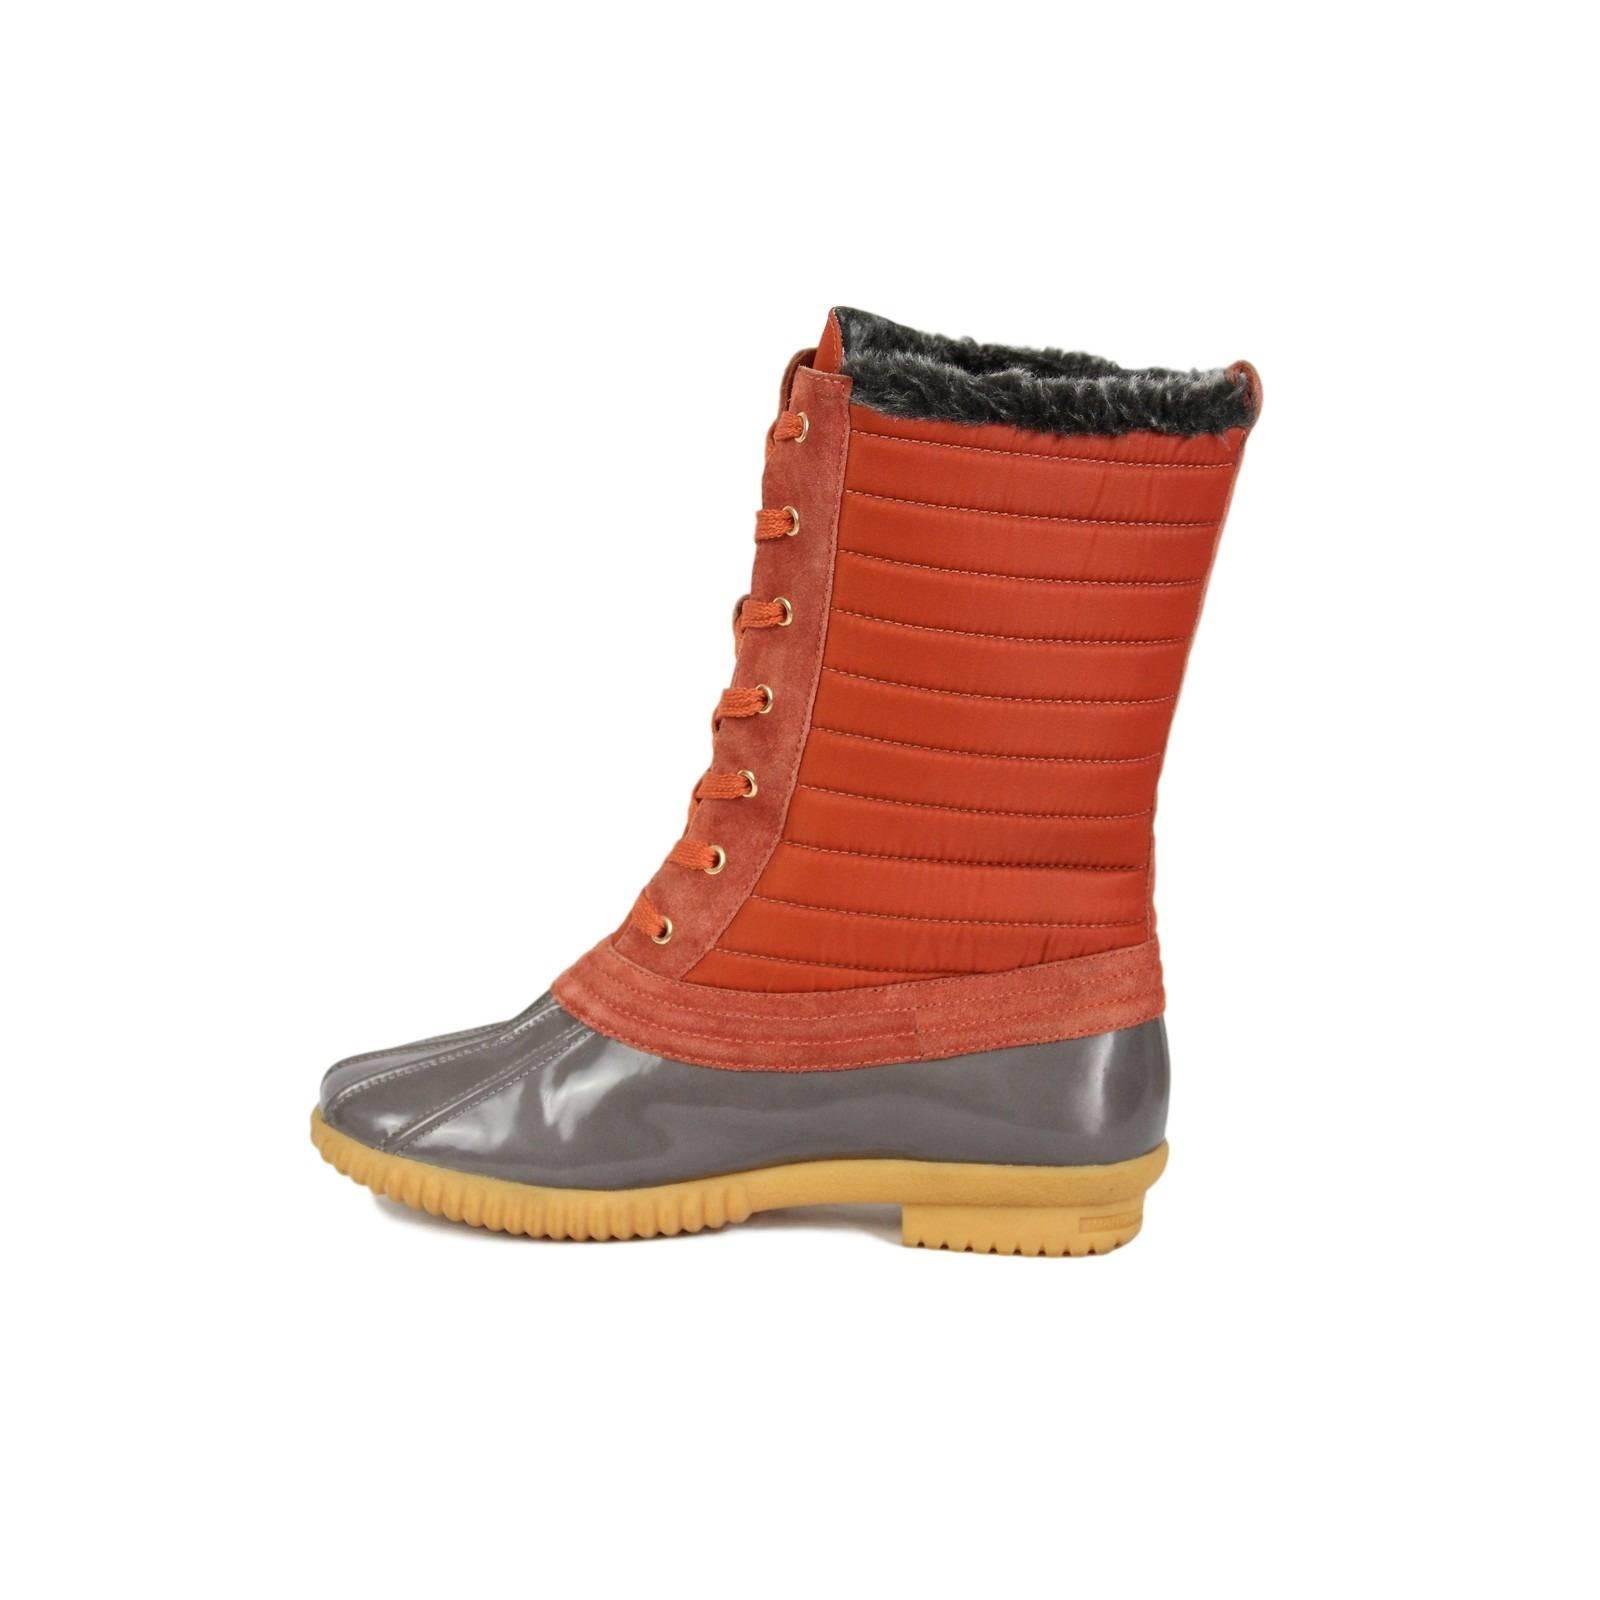 The Marc by Marc Jacobs duck boot belongs in every woman’s closet, especially for those still experiencing a little cold weather. I know singer Christina Aguilera is a fan. This rubber round toe duck boot features a nylon lace up front, shearling